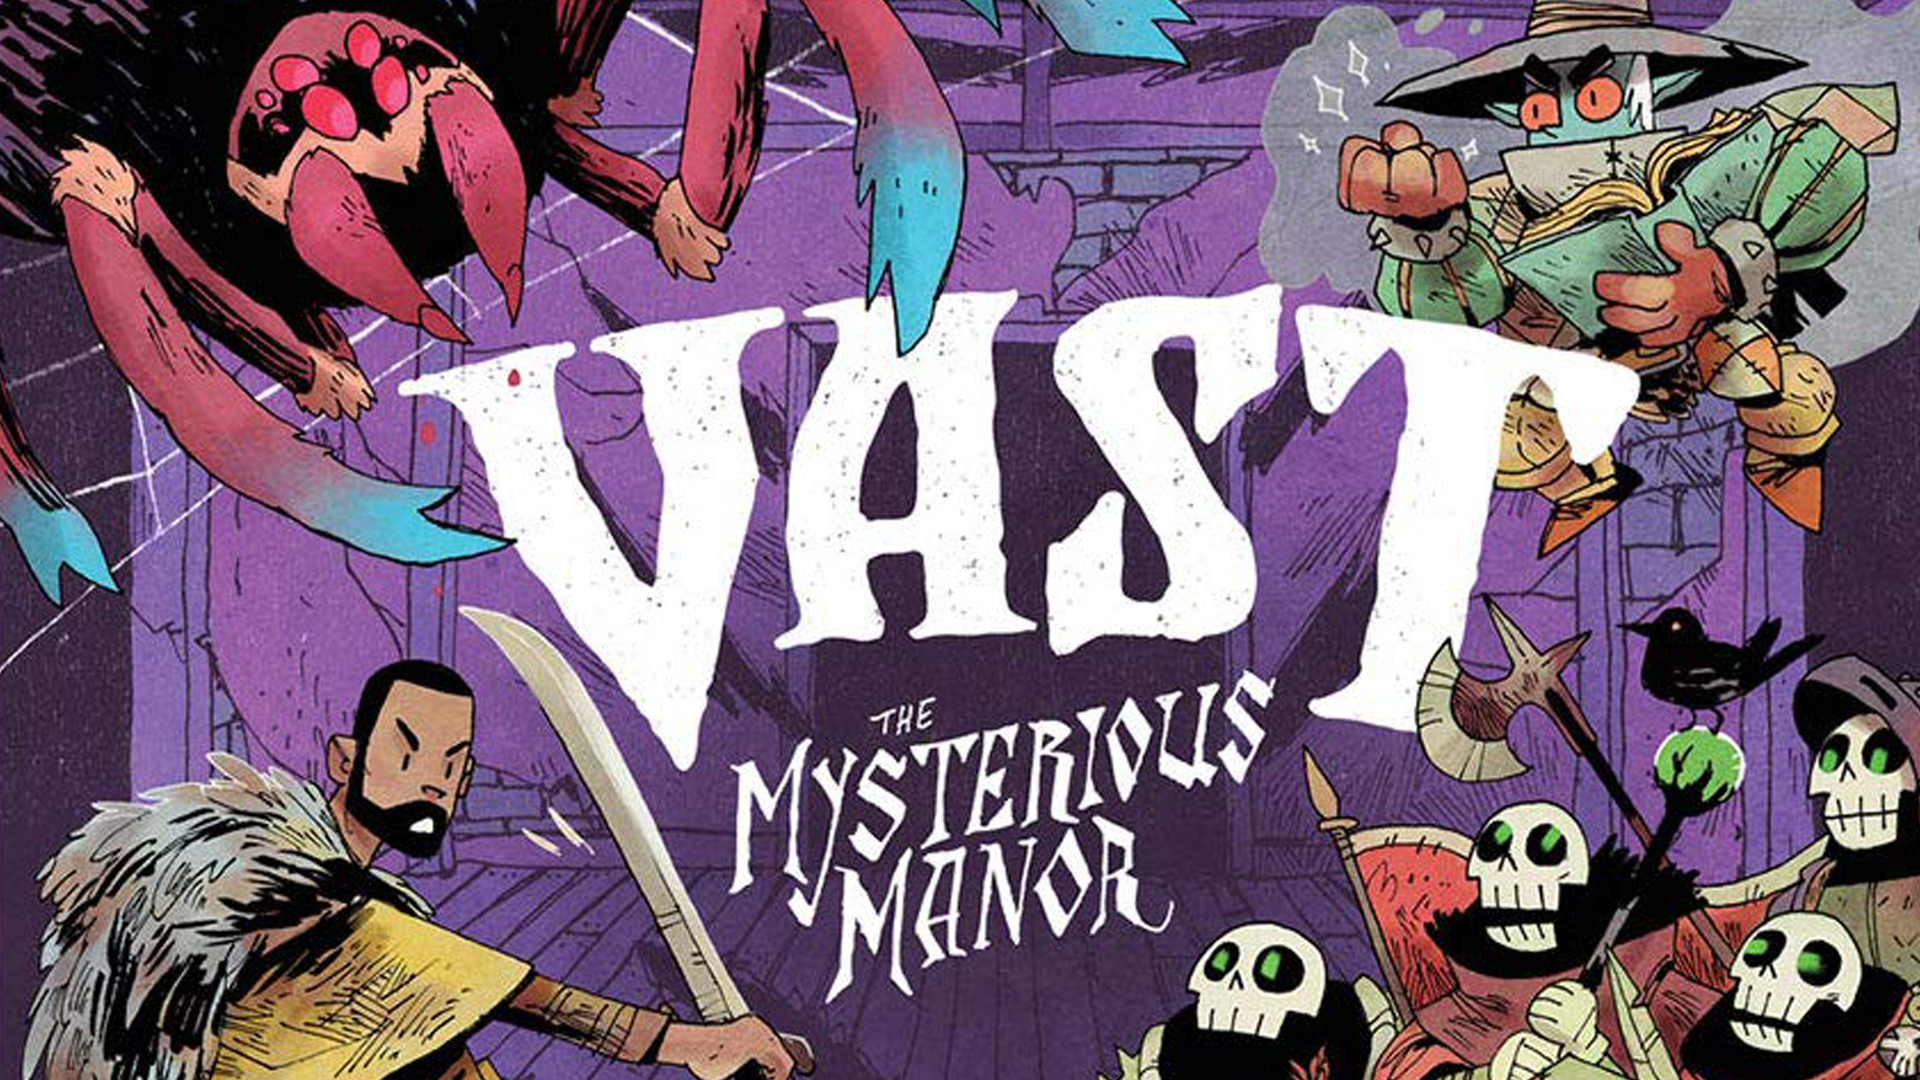 Vast: The Mysterious Manor board game artwork 2